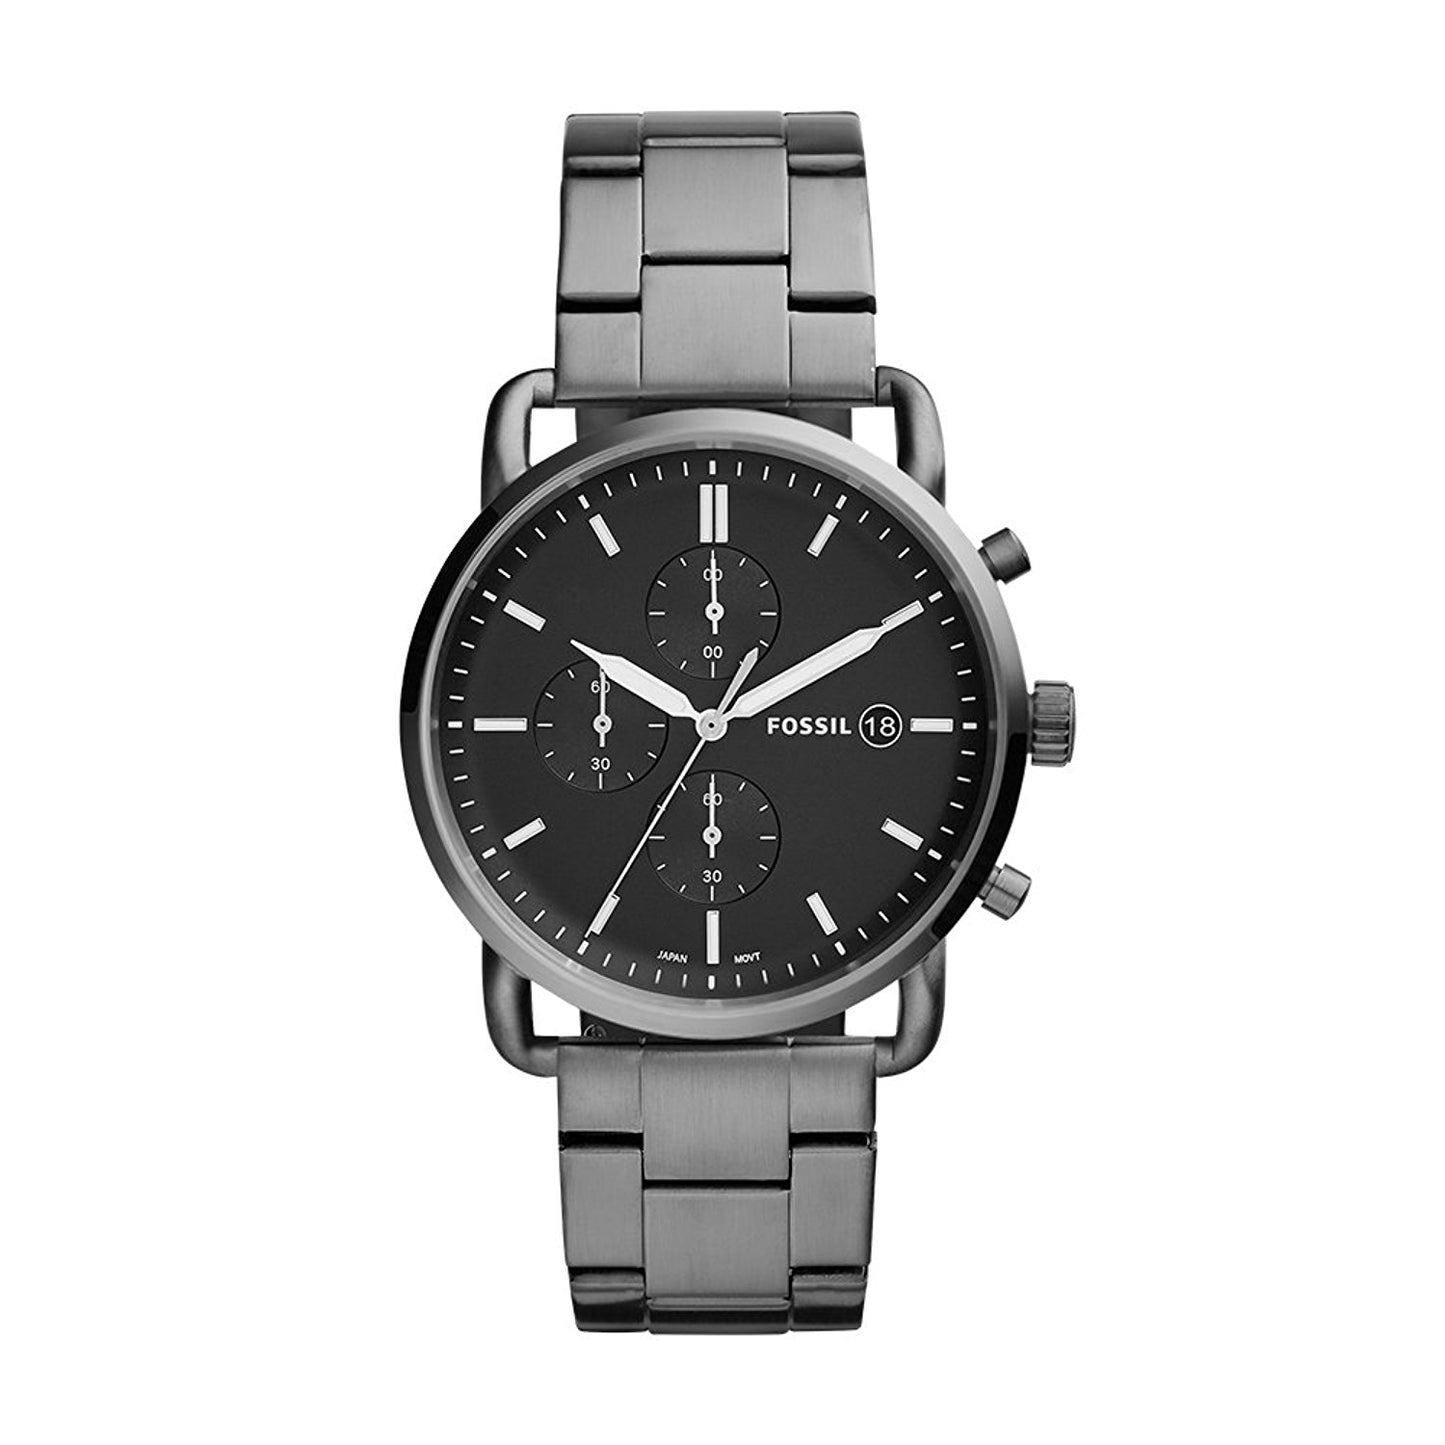 Fossil Men's 'The Commuter' Quartz Stainless Steel Casual Watch Grey ...